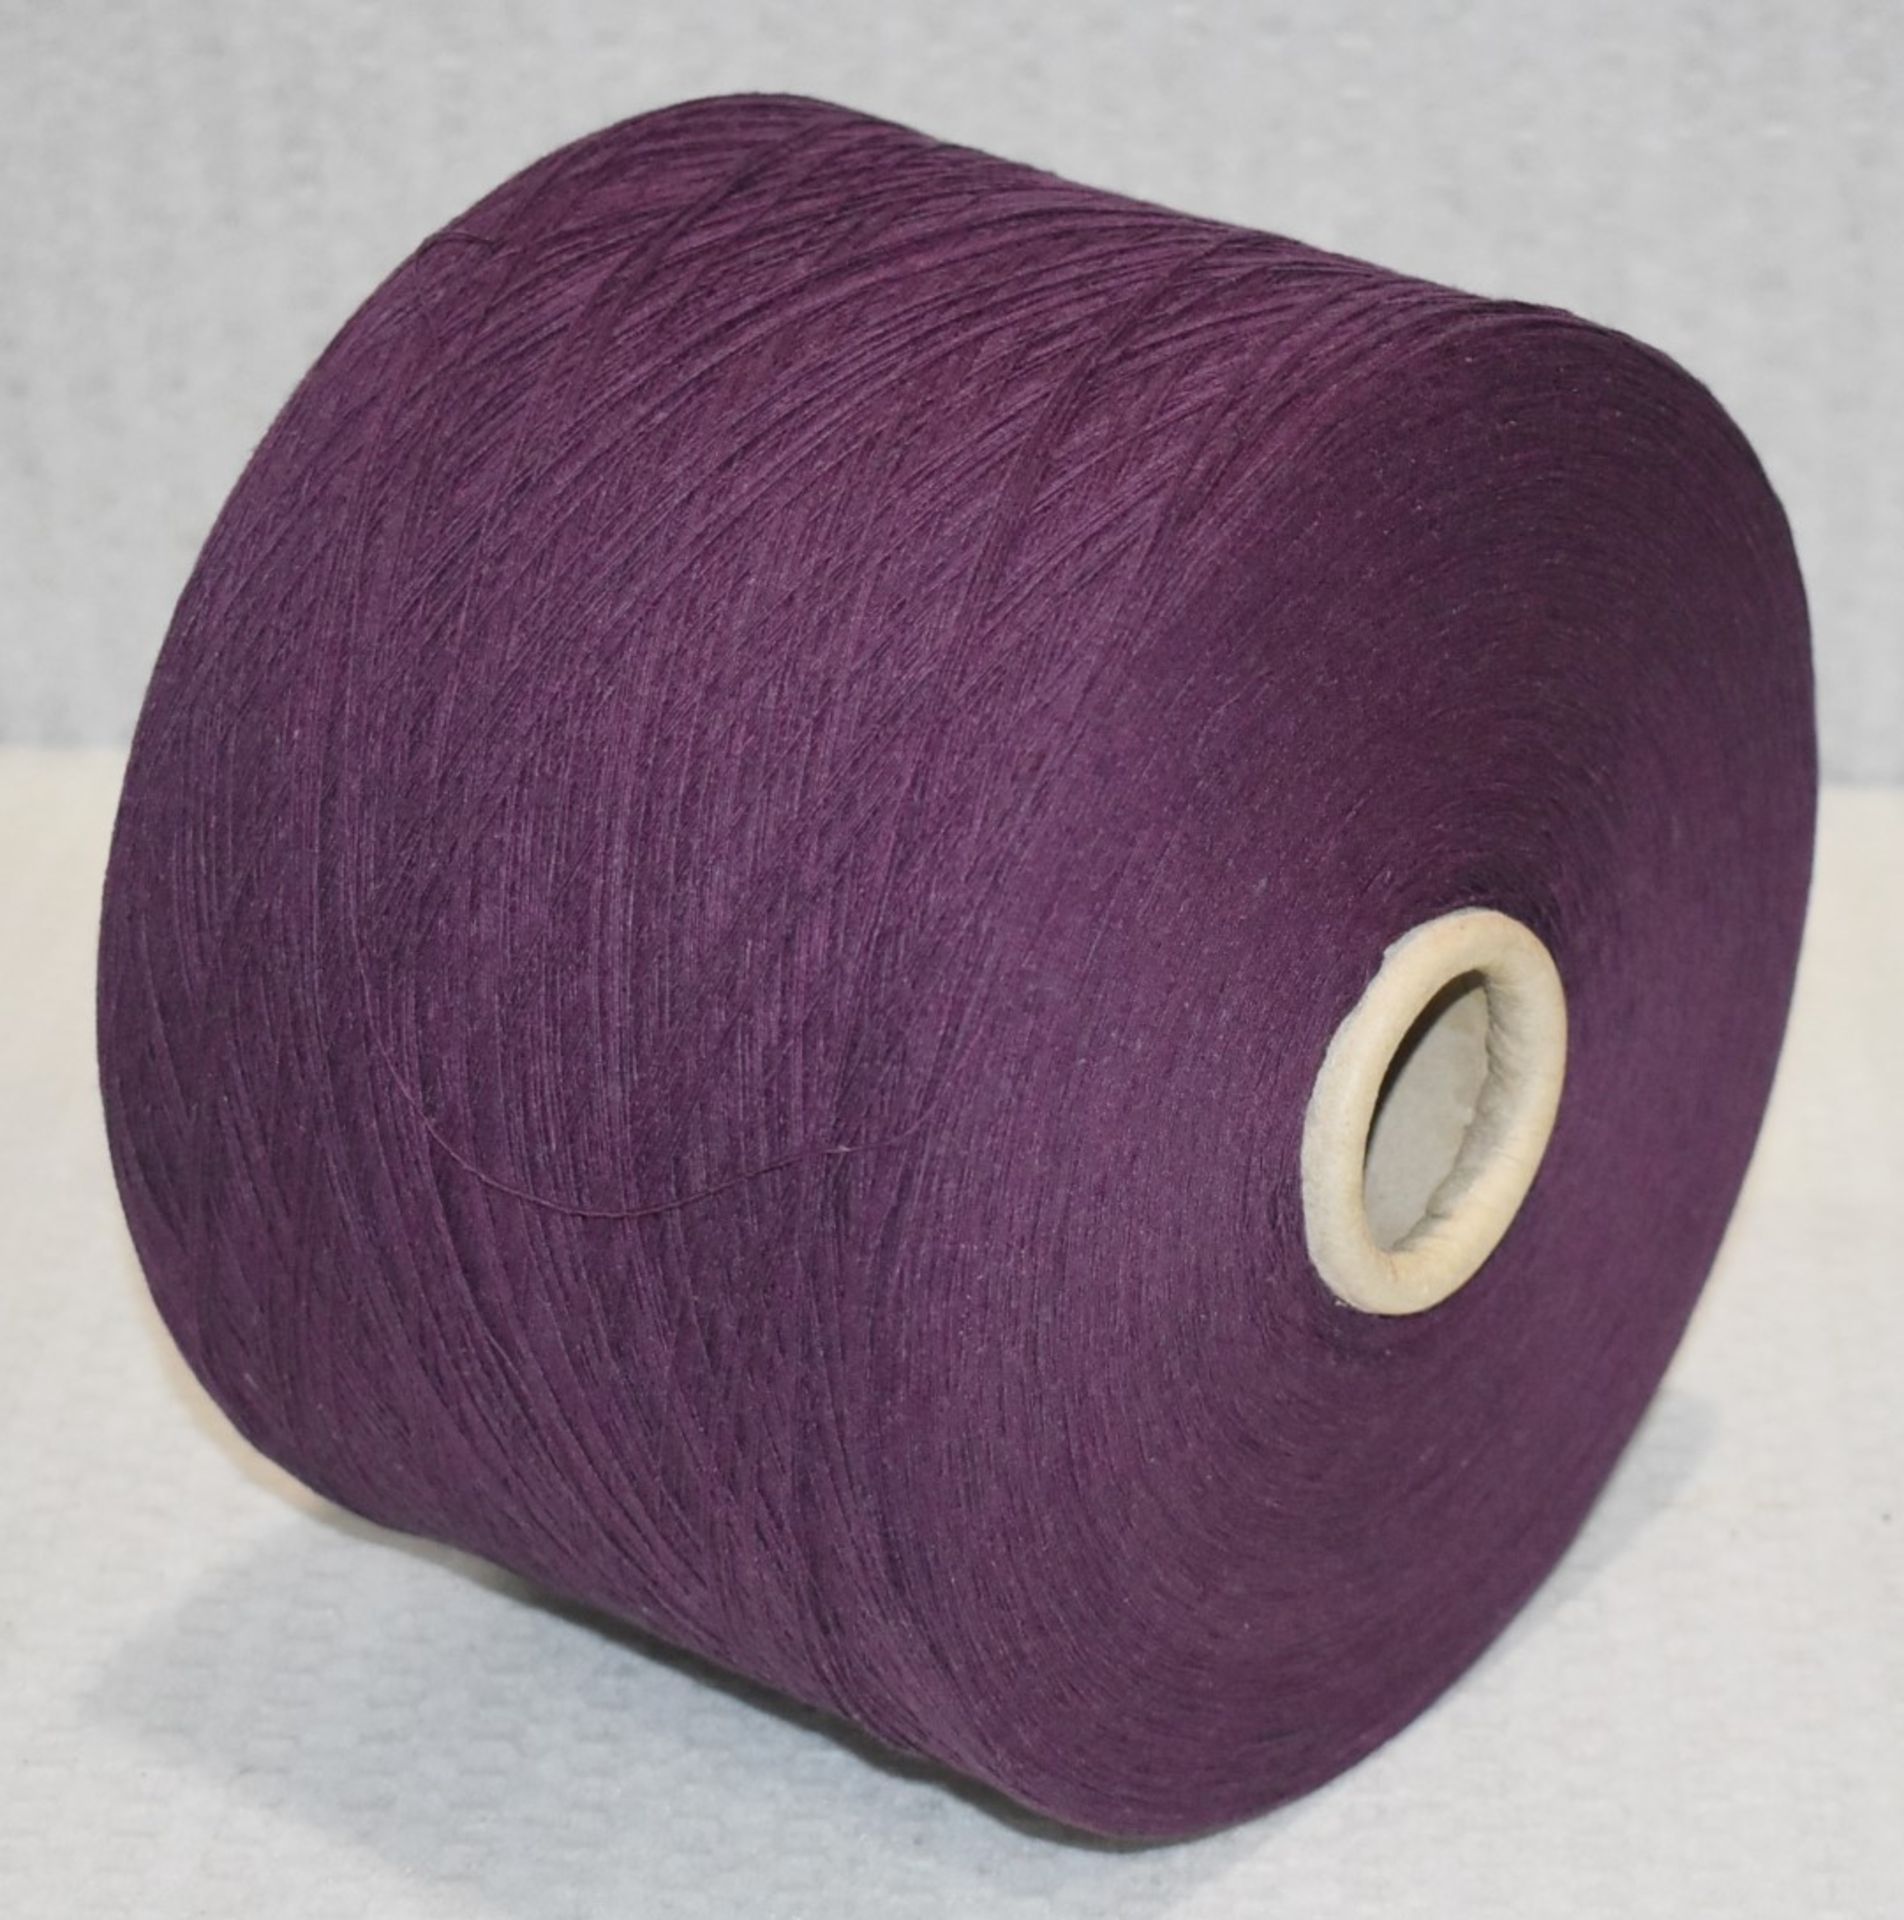 6 x Cones of 1/13 MicroCotton Knitting Yarn - Purple - Approx Weight: 2,300g - New Stock ABL Yarn - Image 5 of 9